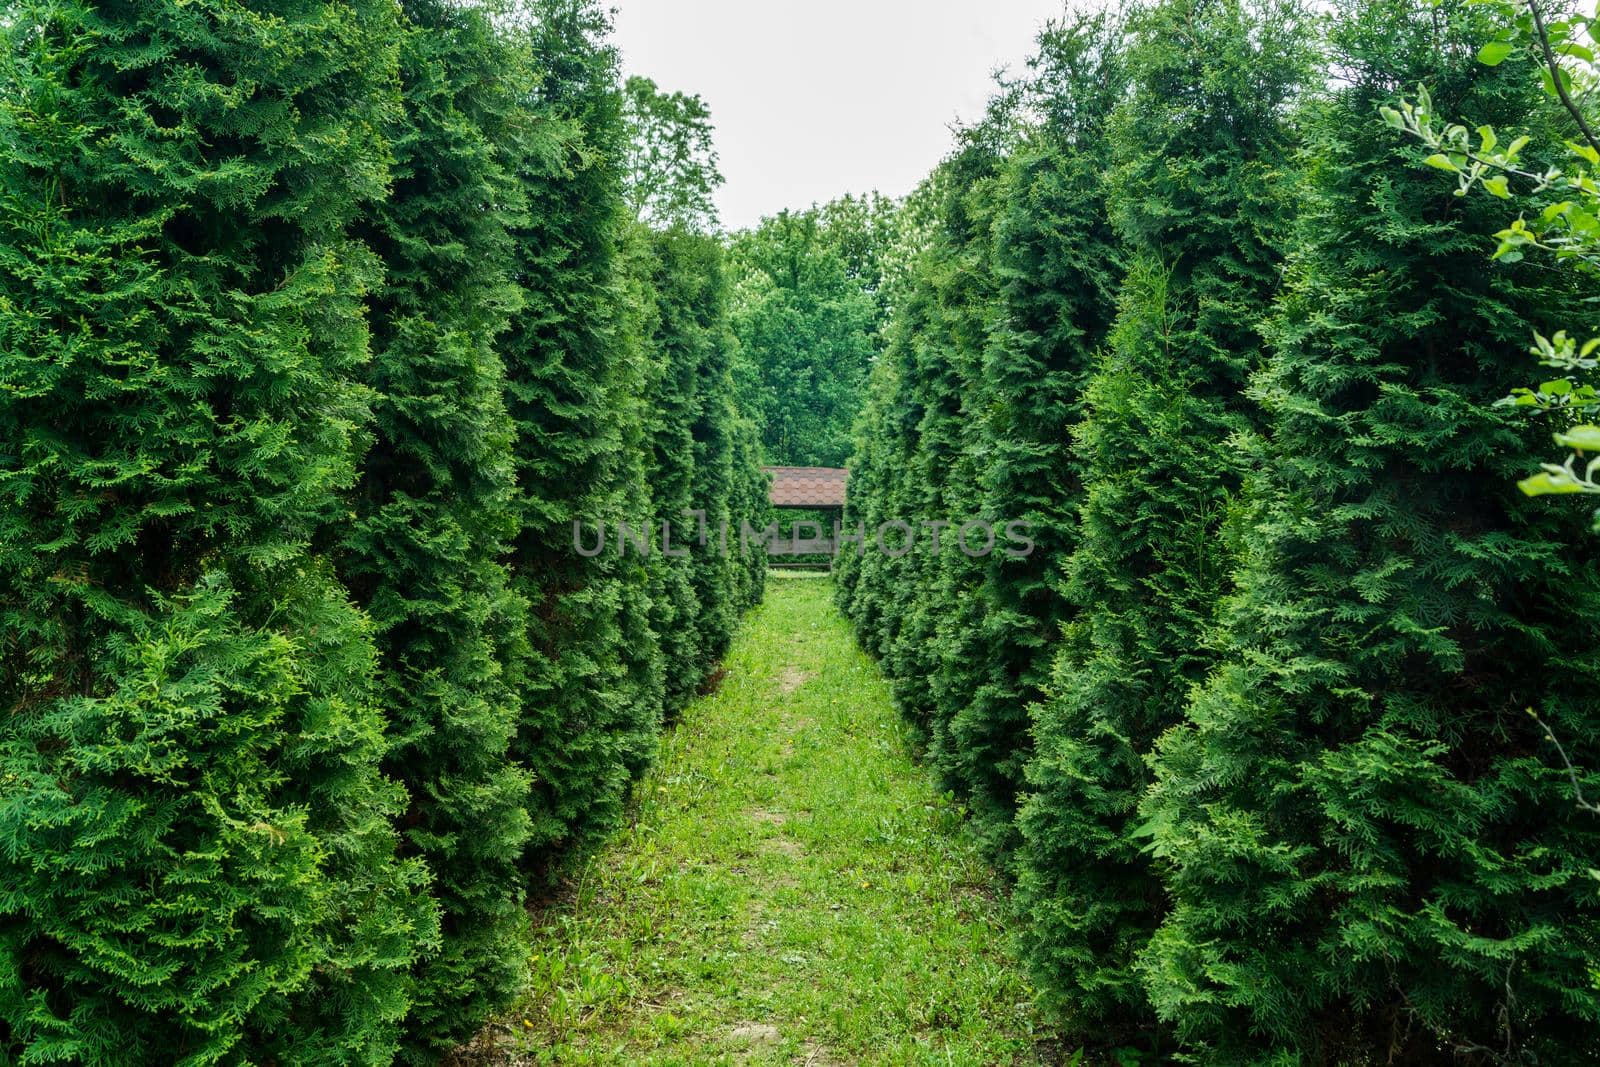 The alley in the park is lined with green thuja on both sides.